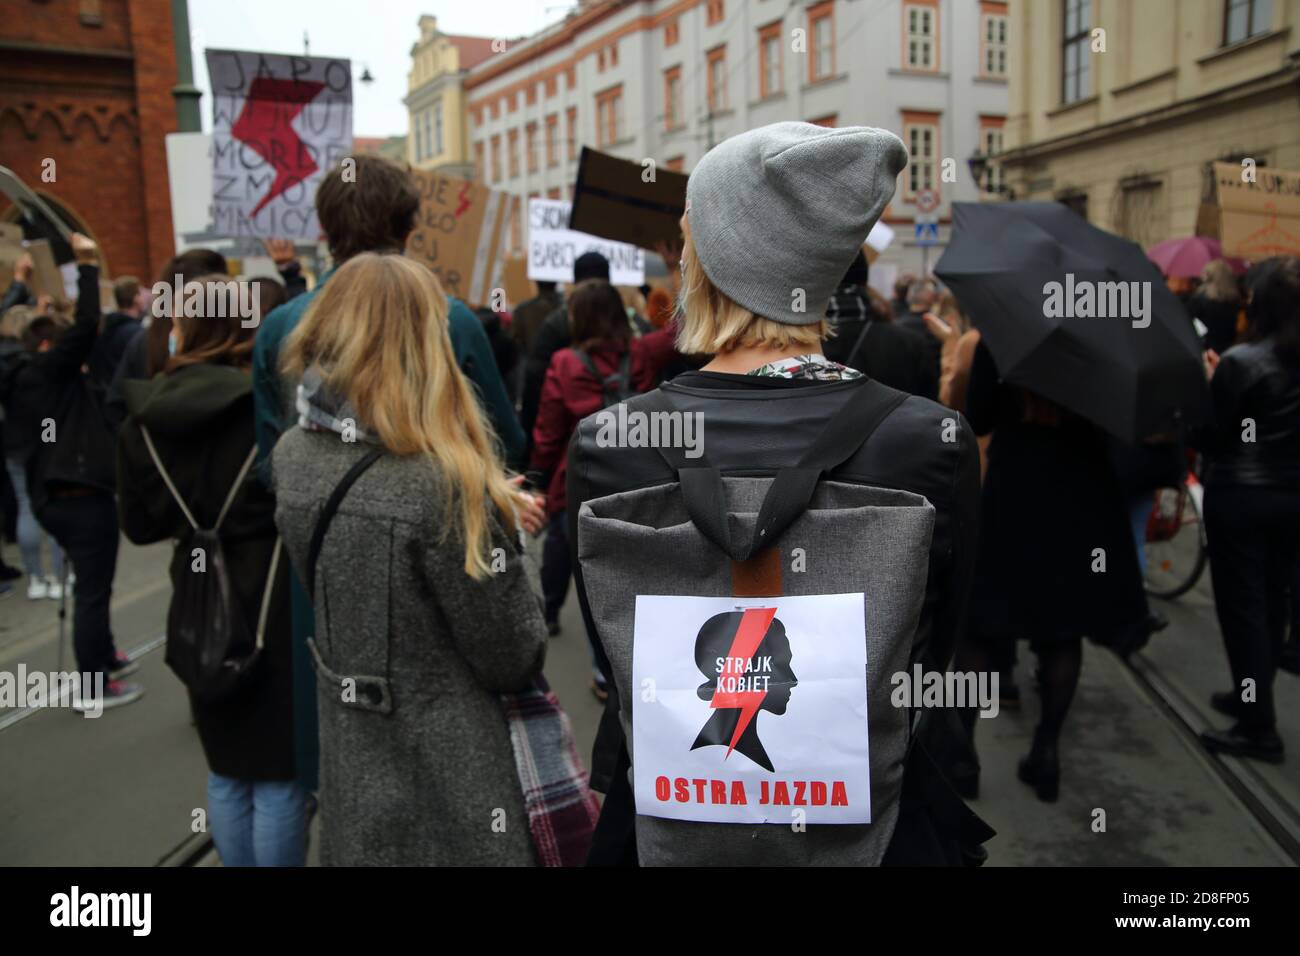 Krakow / Poland - october 25 2020: Anti-government dassive demonstration after decision taken by constitutional tribunal to near-total ban abortion. Stock Photo